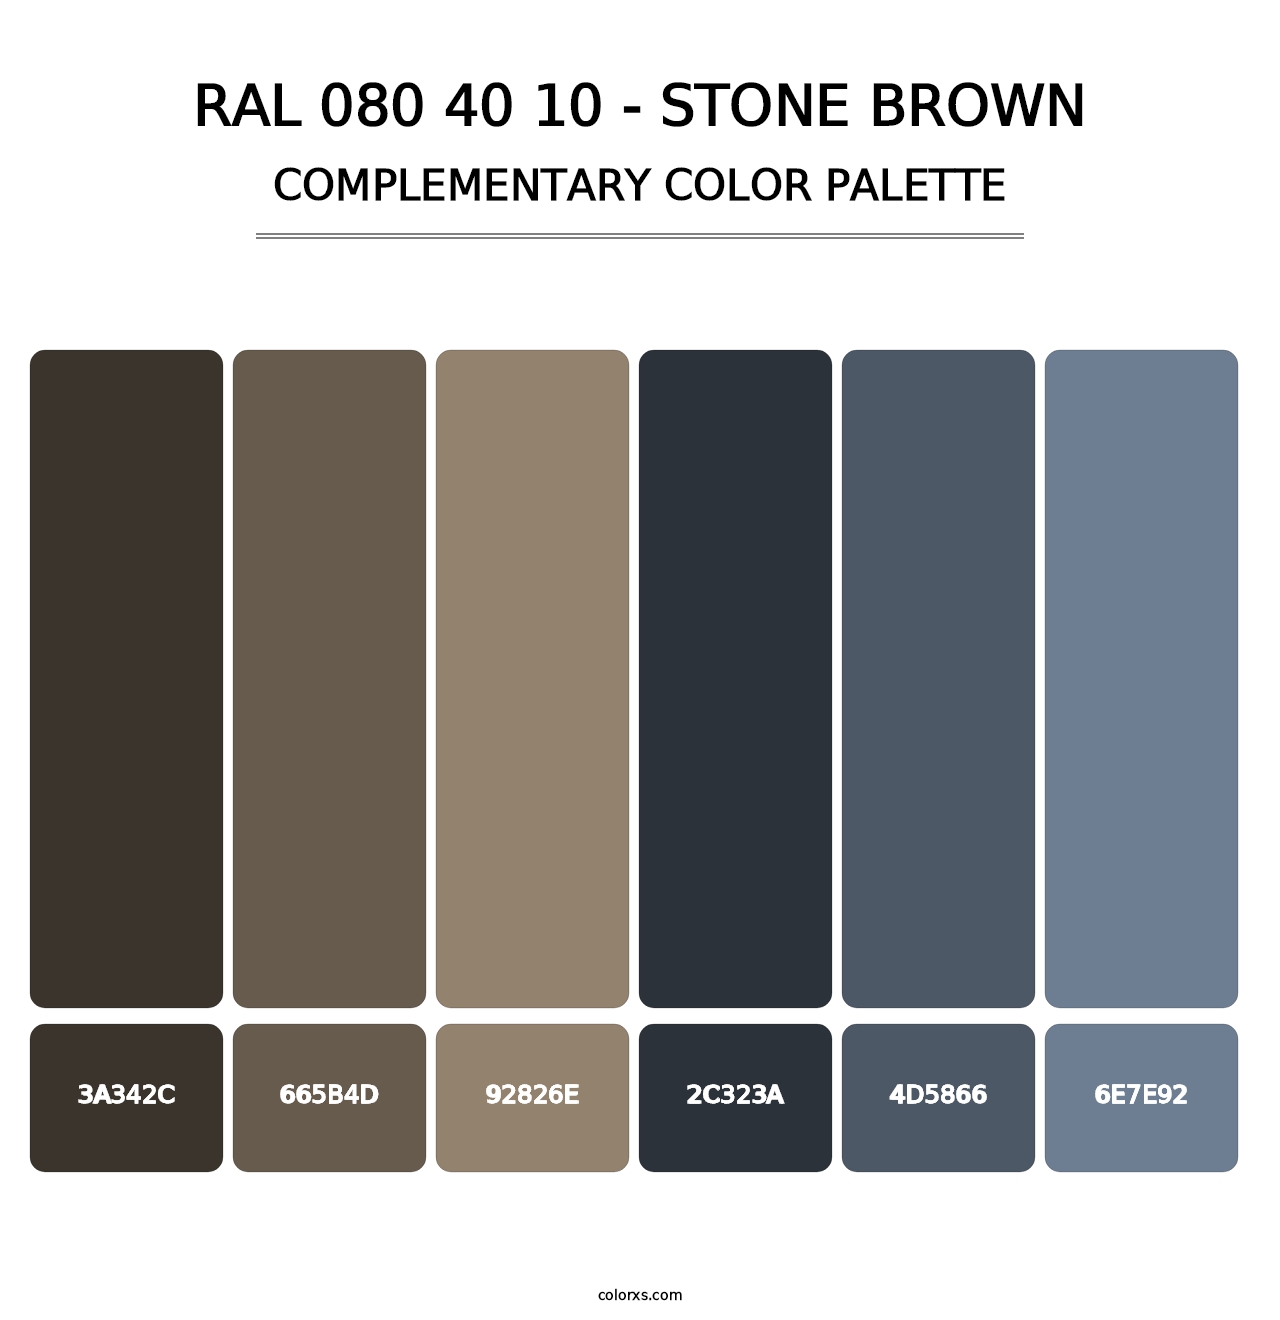 RAL 080 40 10 - Stone Brown - Complementary Color Palette